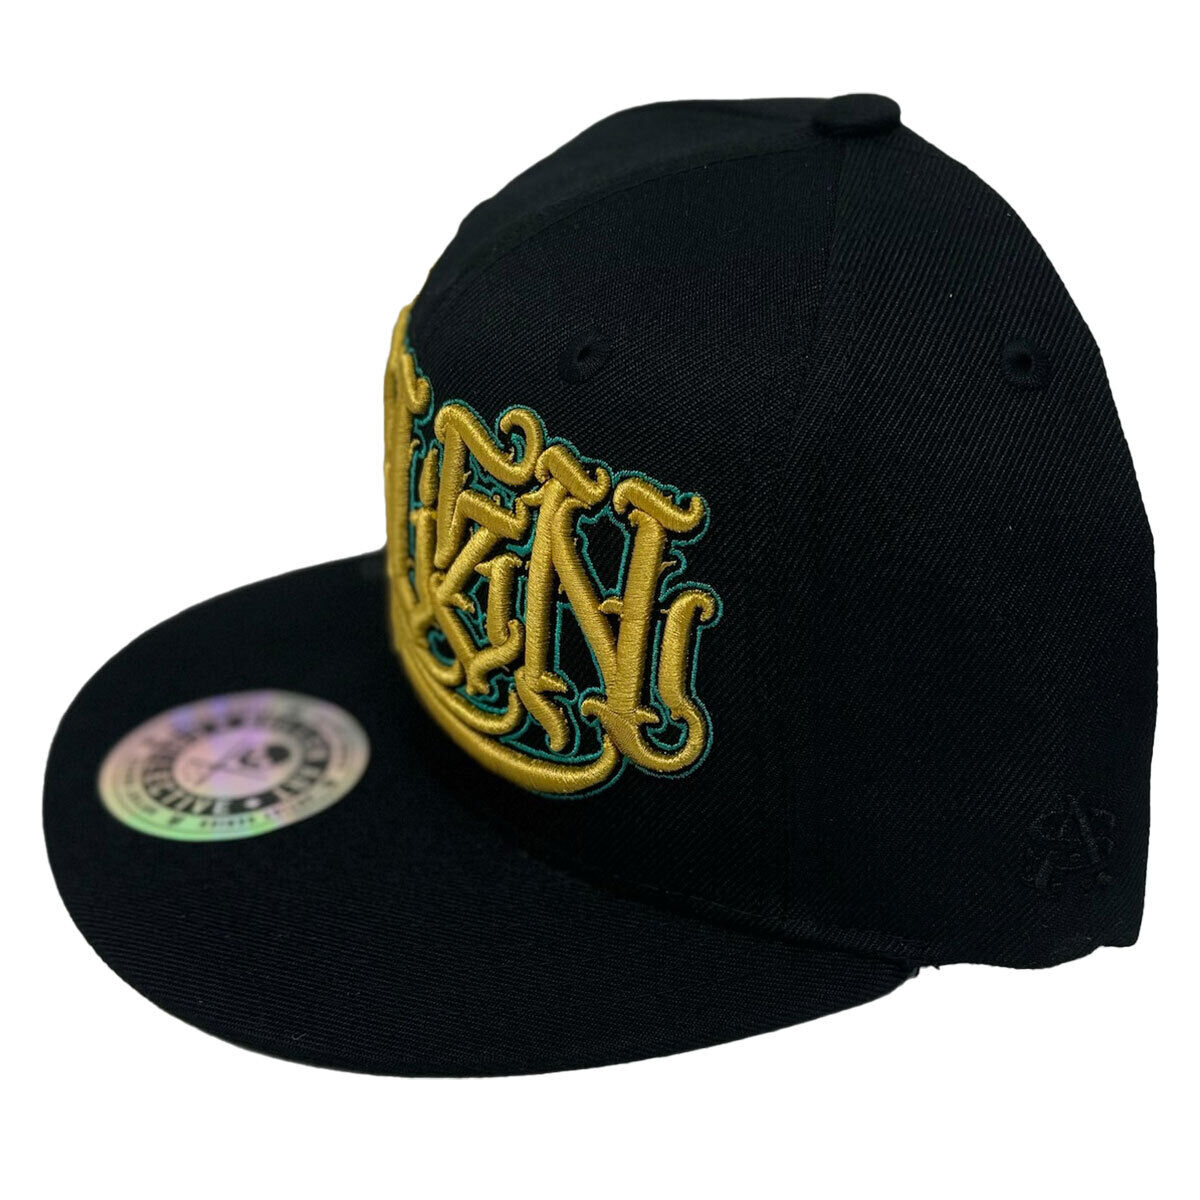 SULLEN ART COLLECTIVE COBRA SNAPBACK - HAT - Synik Clothing - synikclothing.com